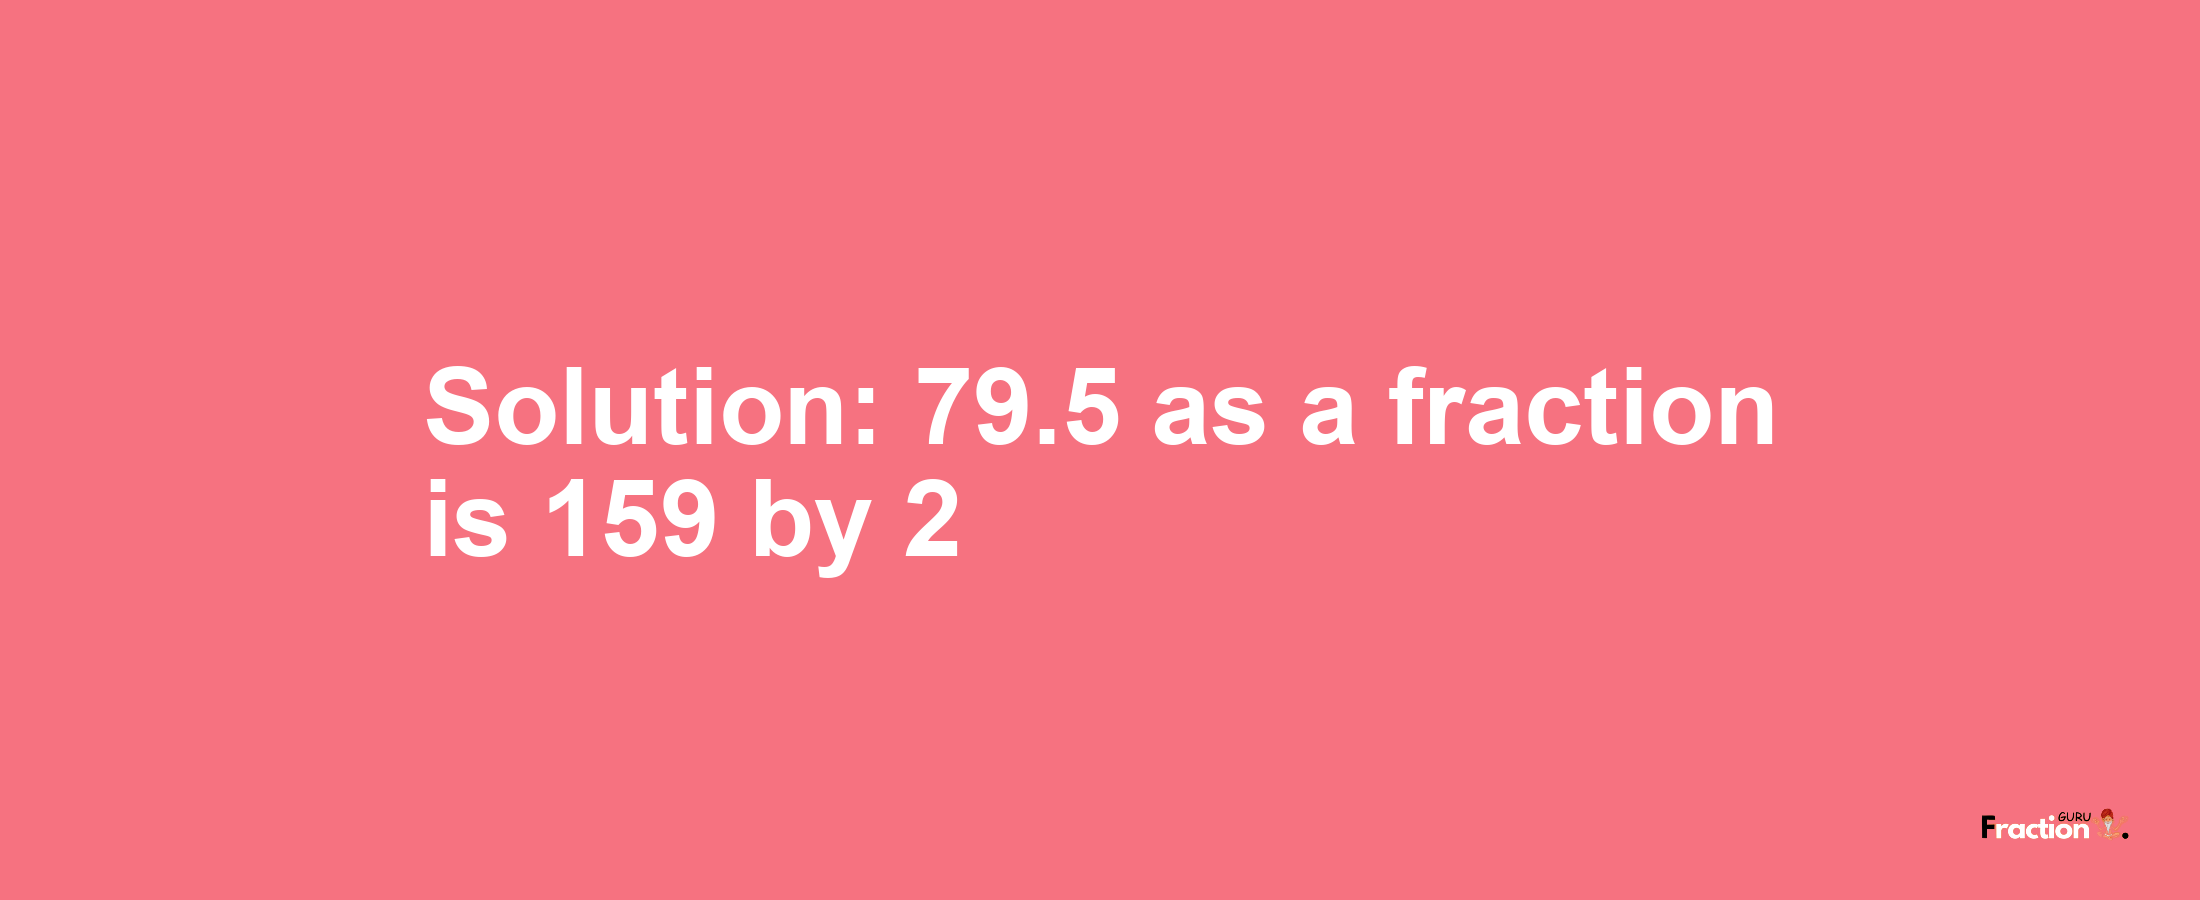 Solution:79.5 as a fraction is 159/2